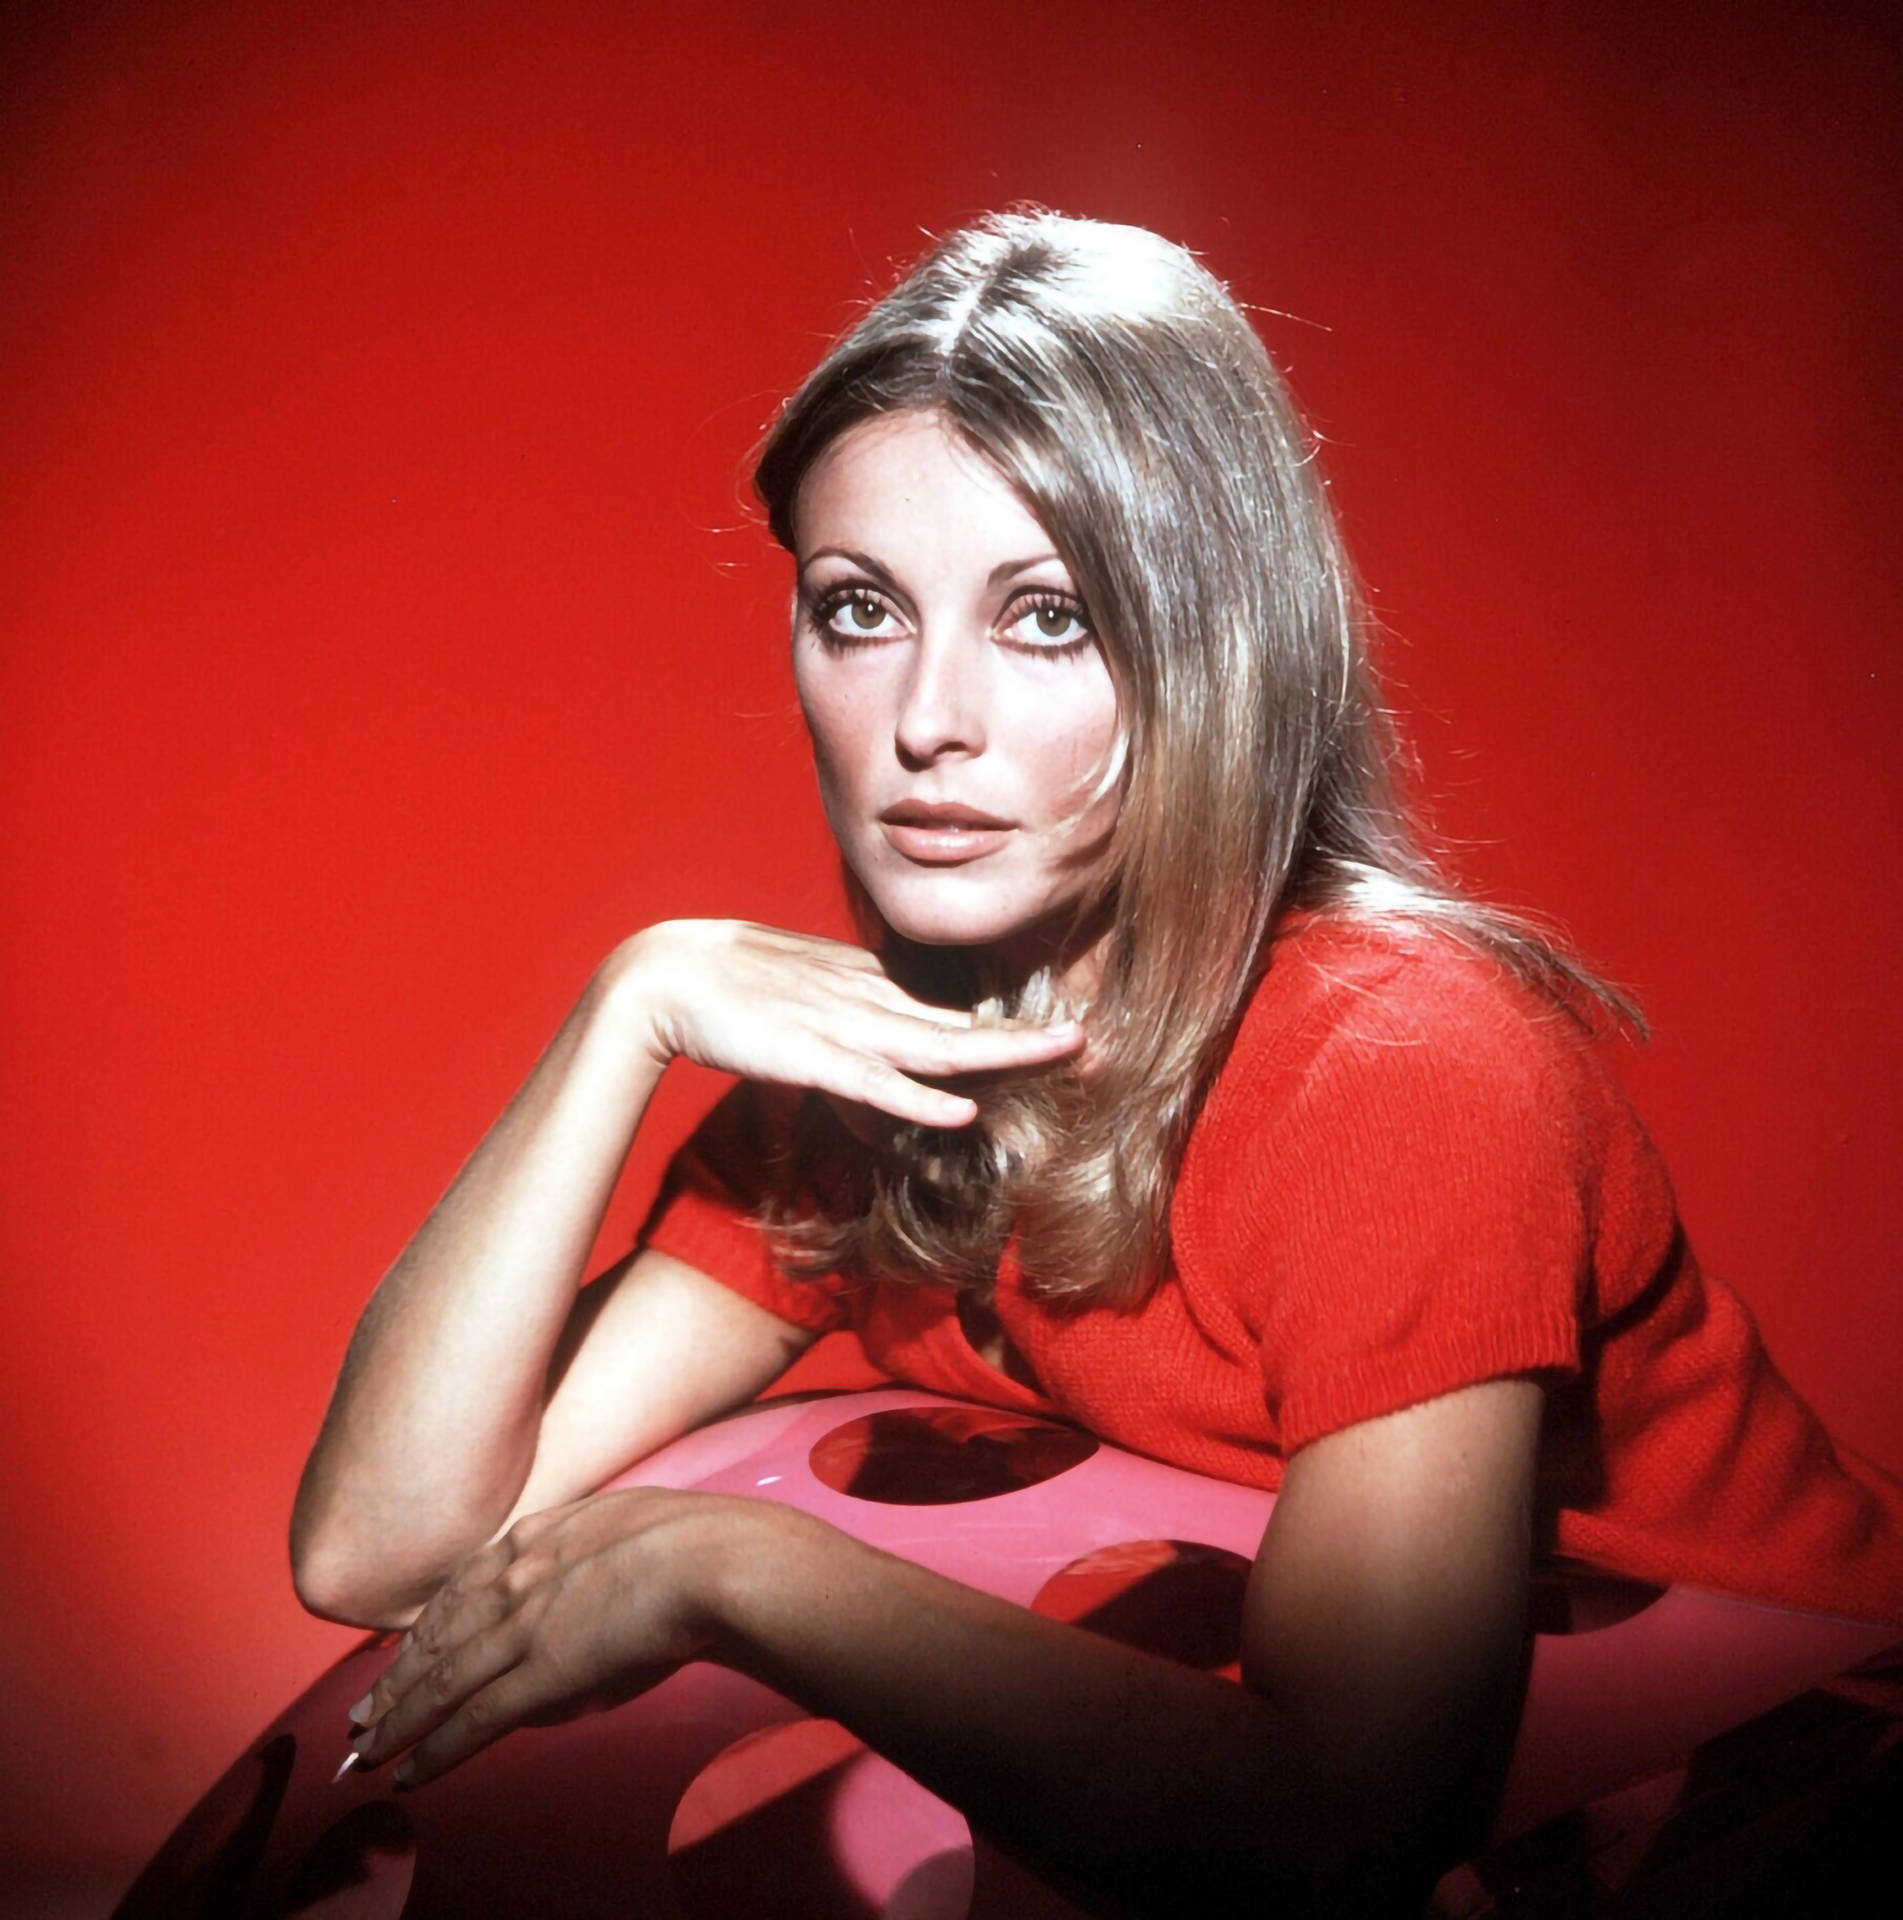 Sharon Tate On Red Background